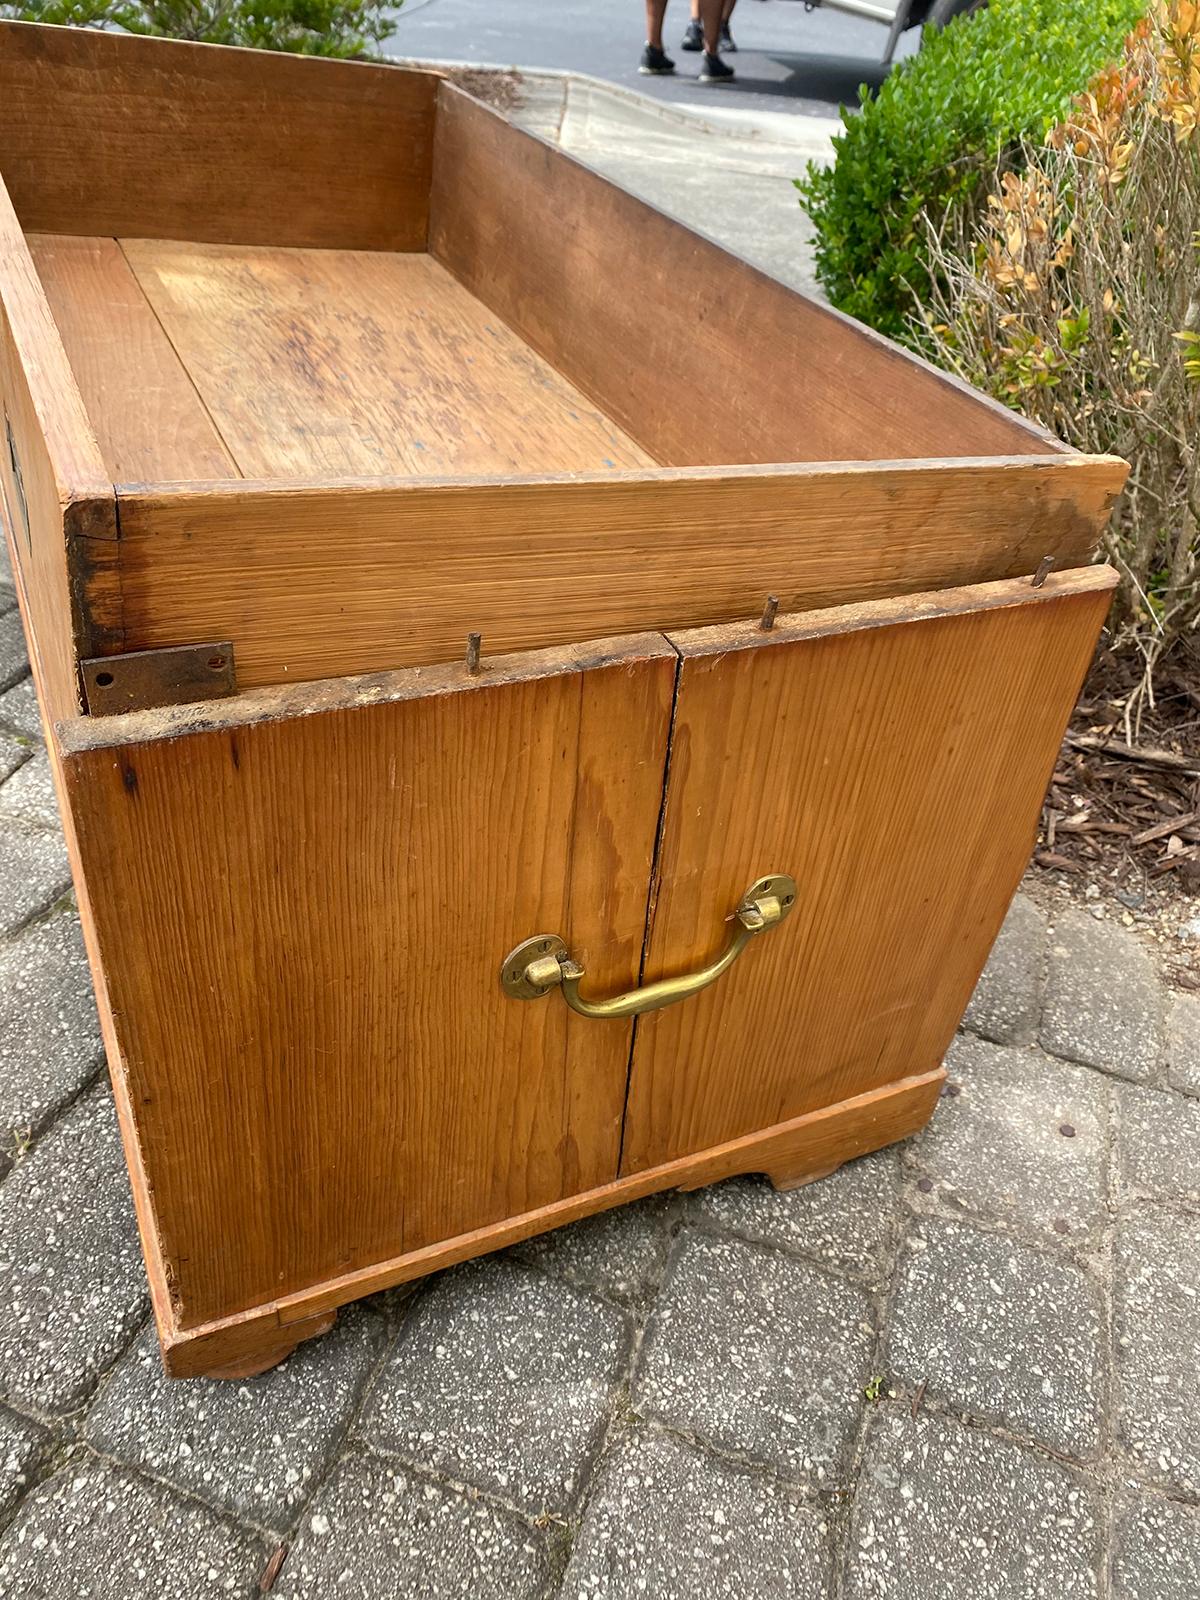 Circa 1880s-1890s English Pine Campaign Chest of Drawers For Sale 2